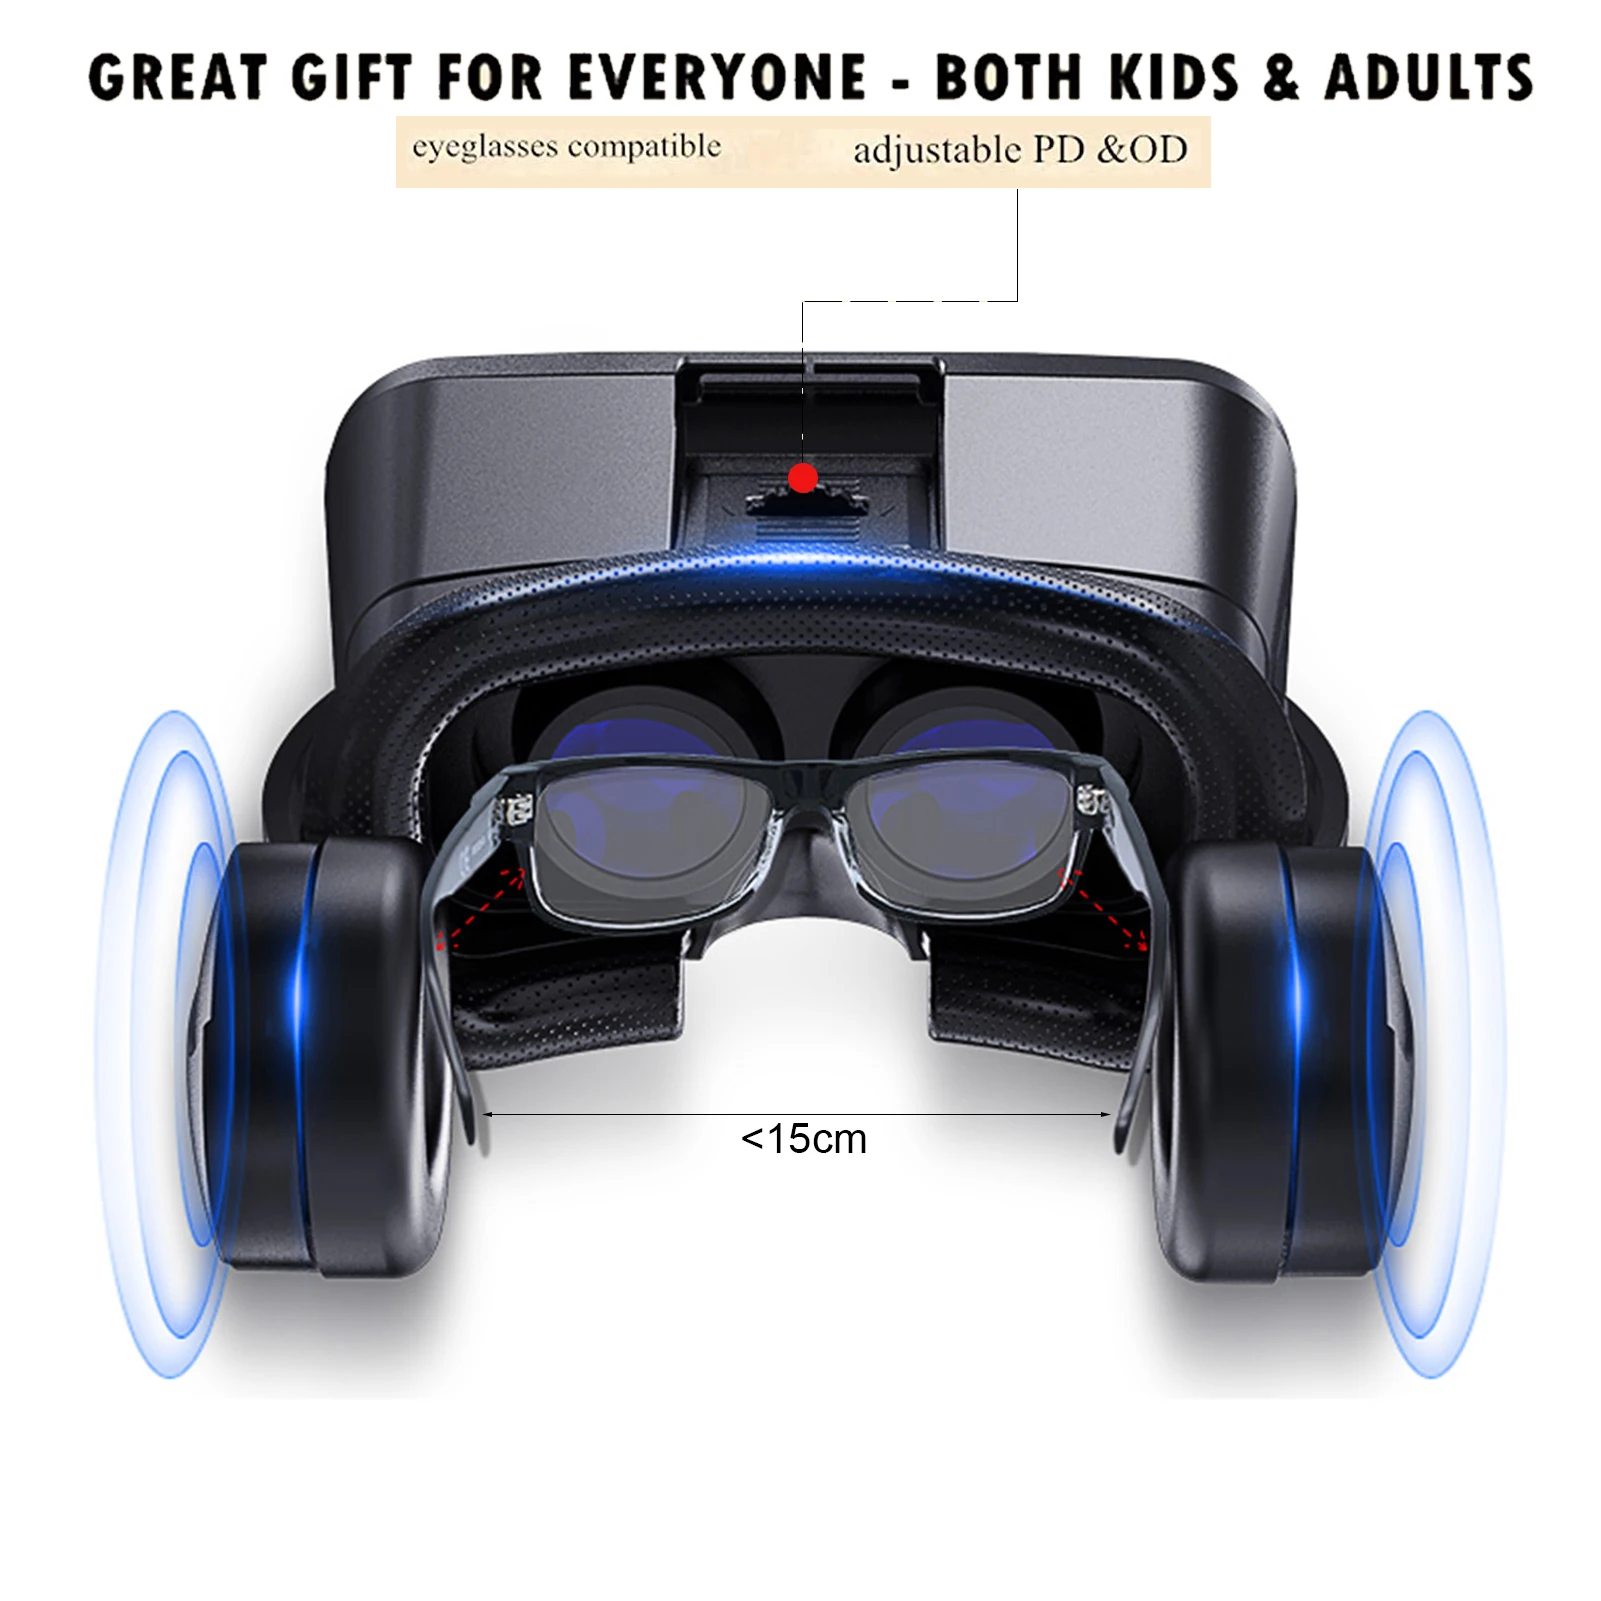 FOR 3D Virtual Reality VR Glasses Support 0-600 Myopia VR Glasses 360-degree Enclosed Stereo HIF Headset For IOS Android enlarge